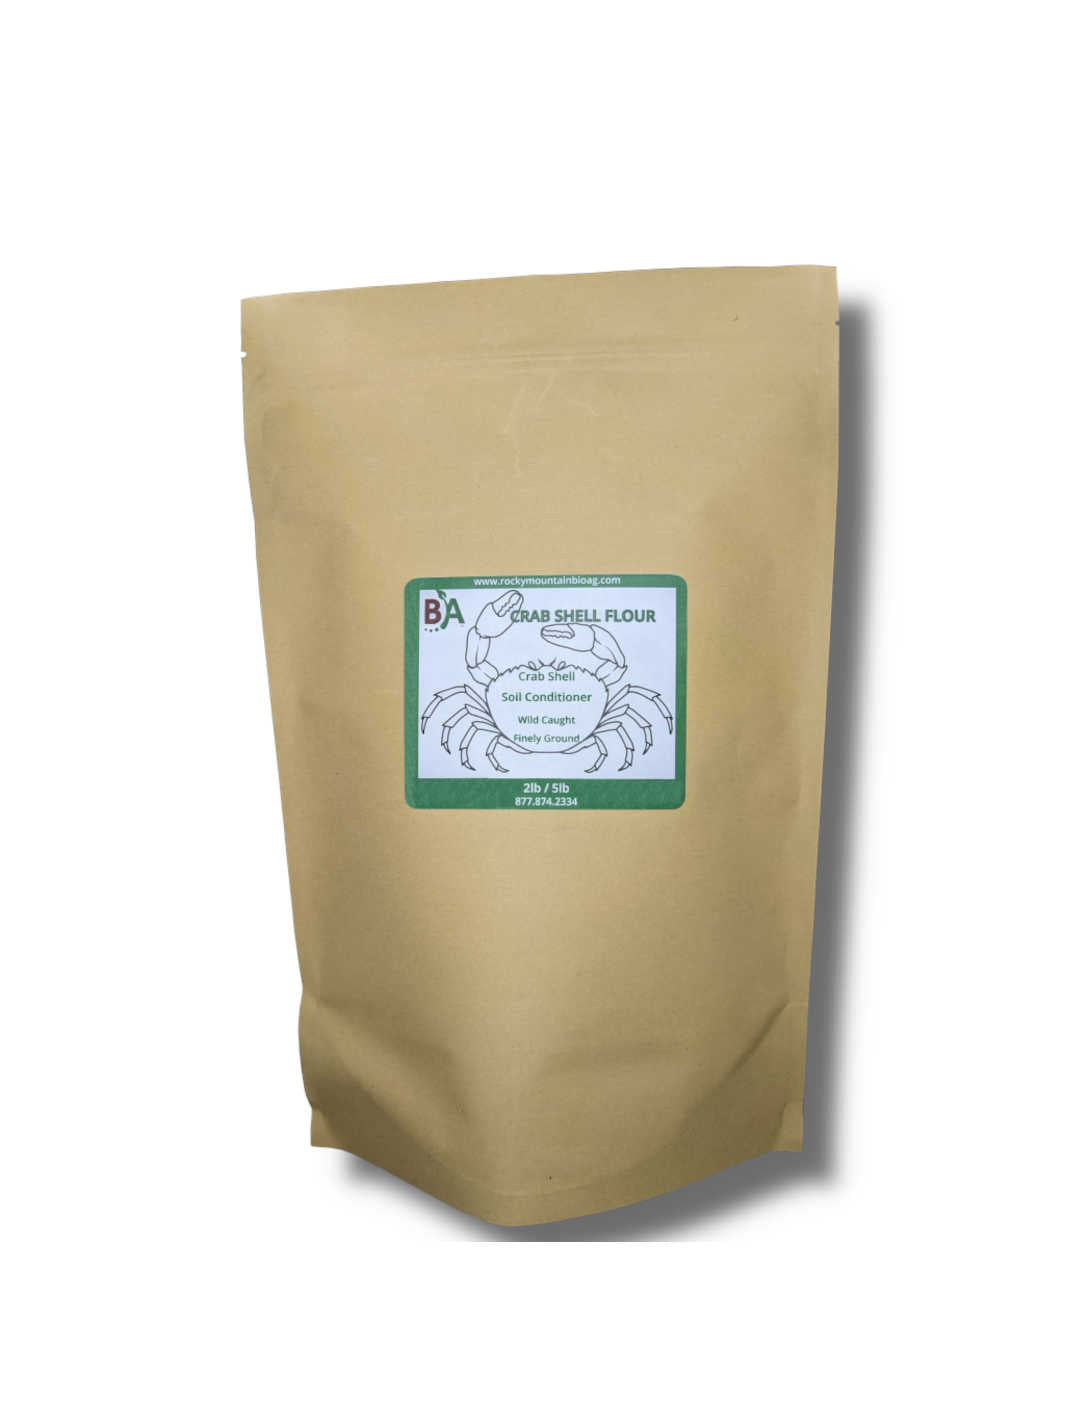 Crabshell Flour for Chitin and Calcium Soil Improvement in 2lb Bag